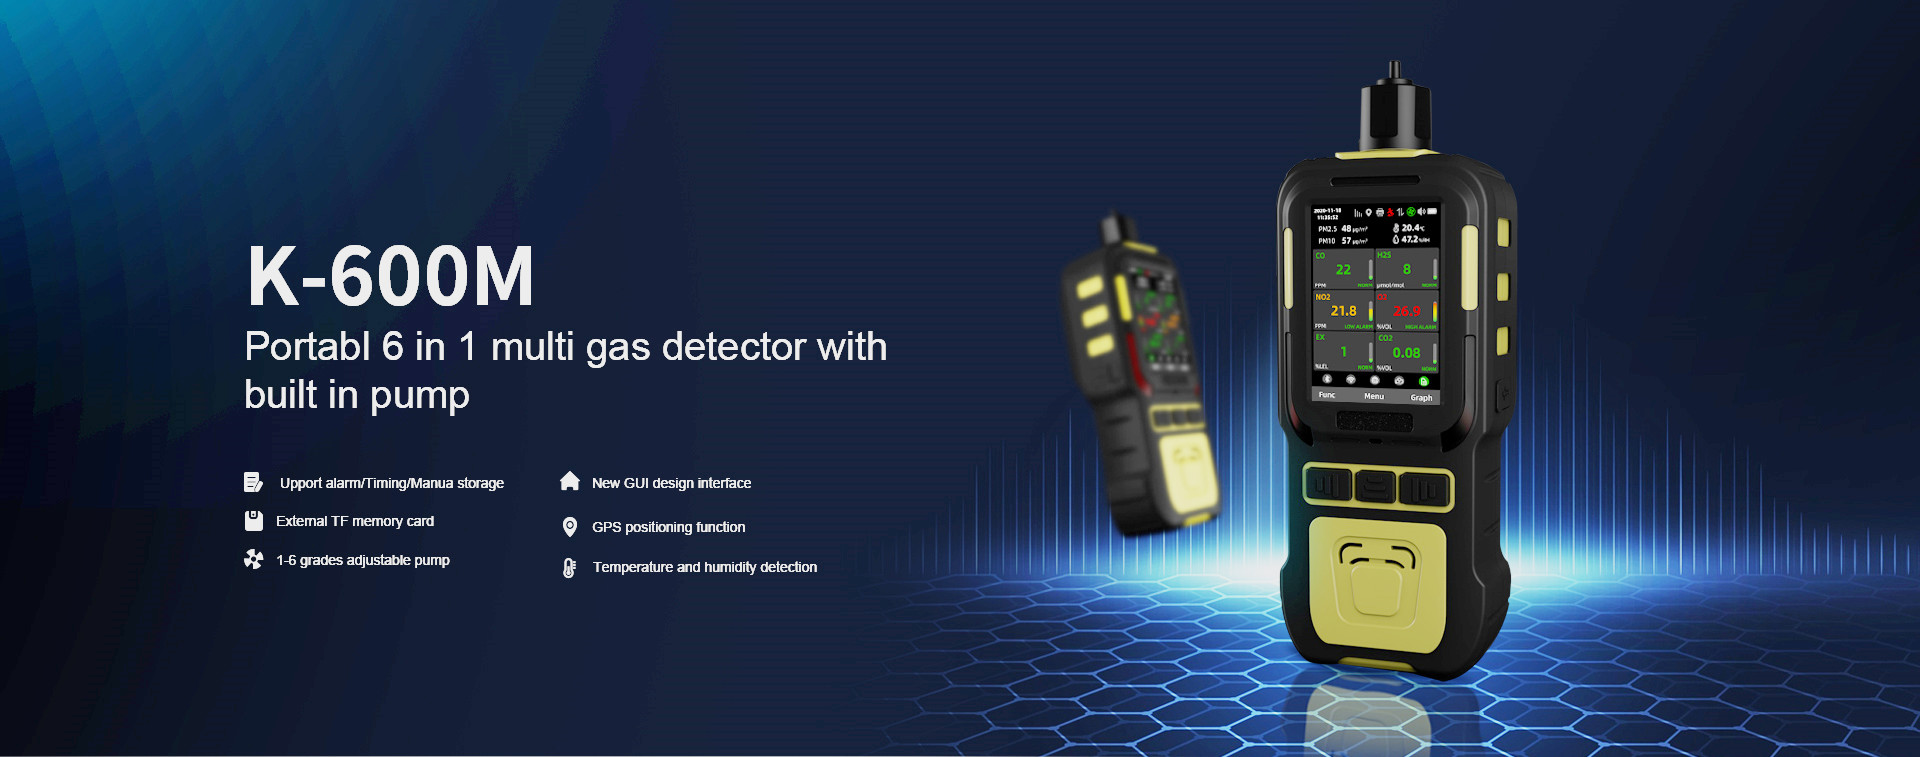 K600M 6 in 1 gas detector with pump